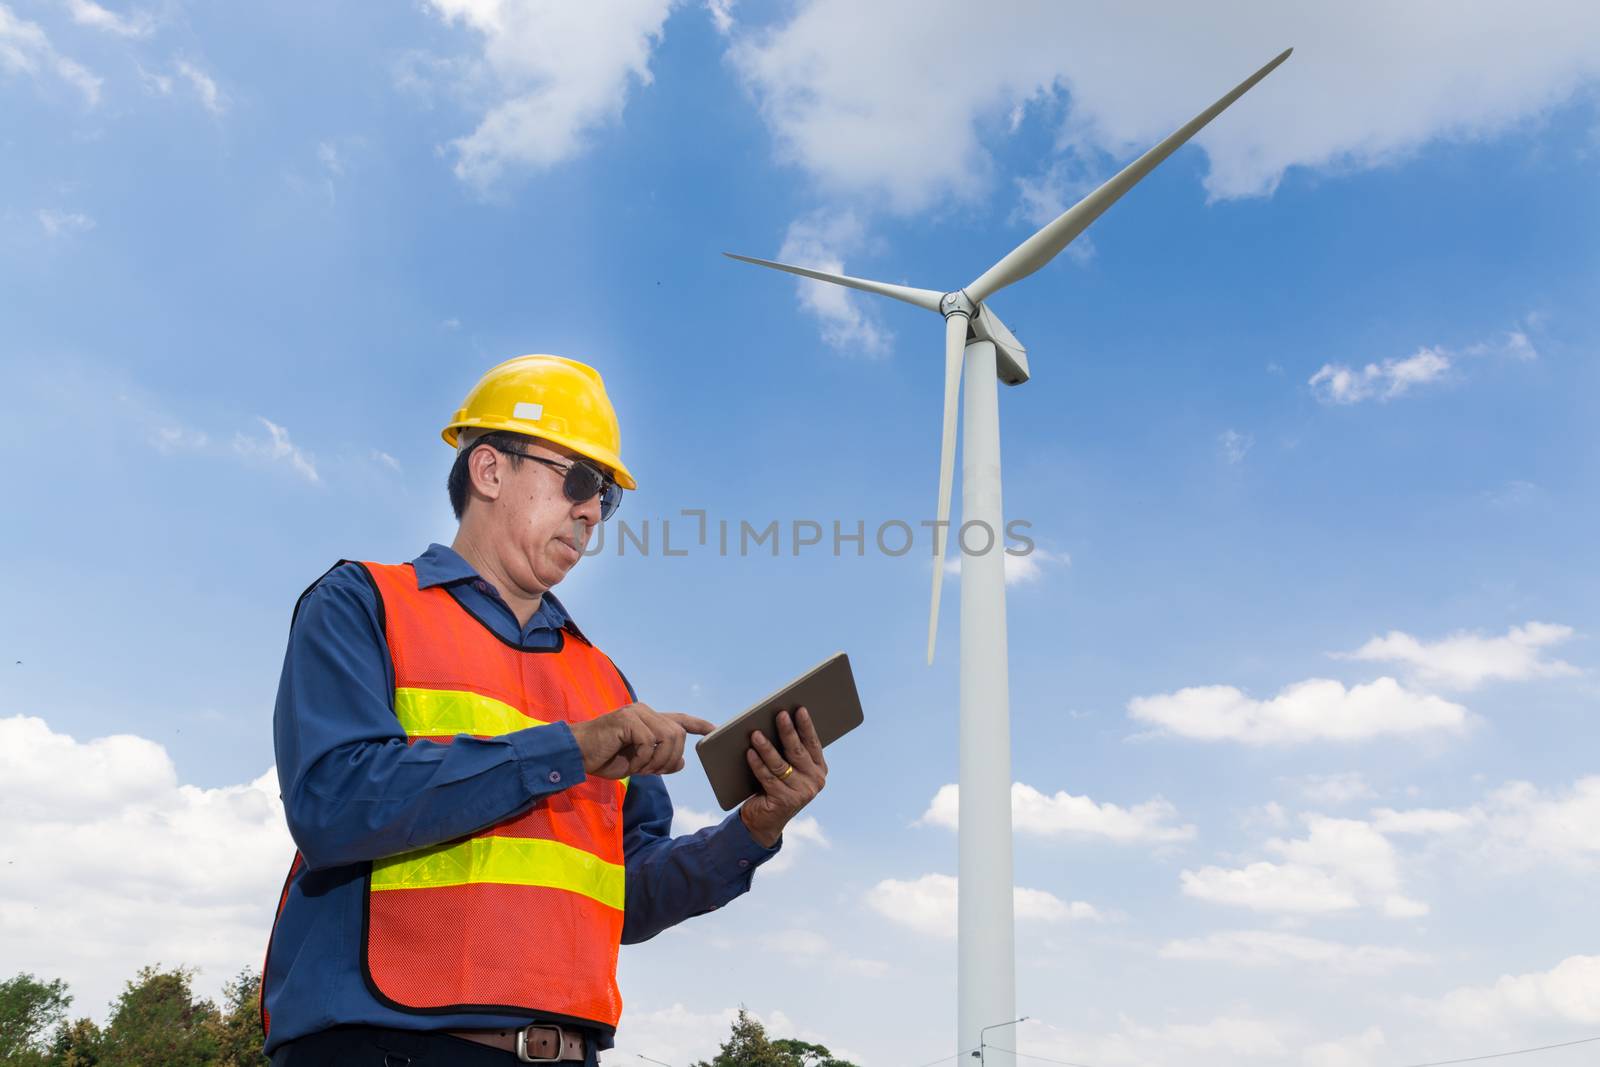 Electric Engineer use Digital Wireless Tablet Device with Wind turbine power Generator Tower Background as Green energy or Renewable Energy Technology Project Development Concept.